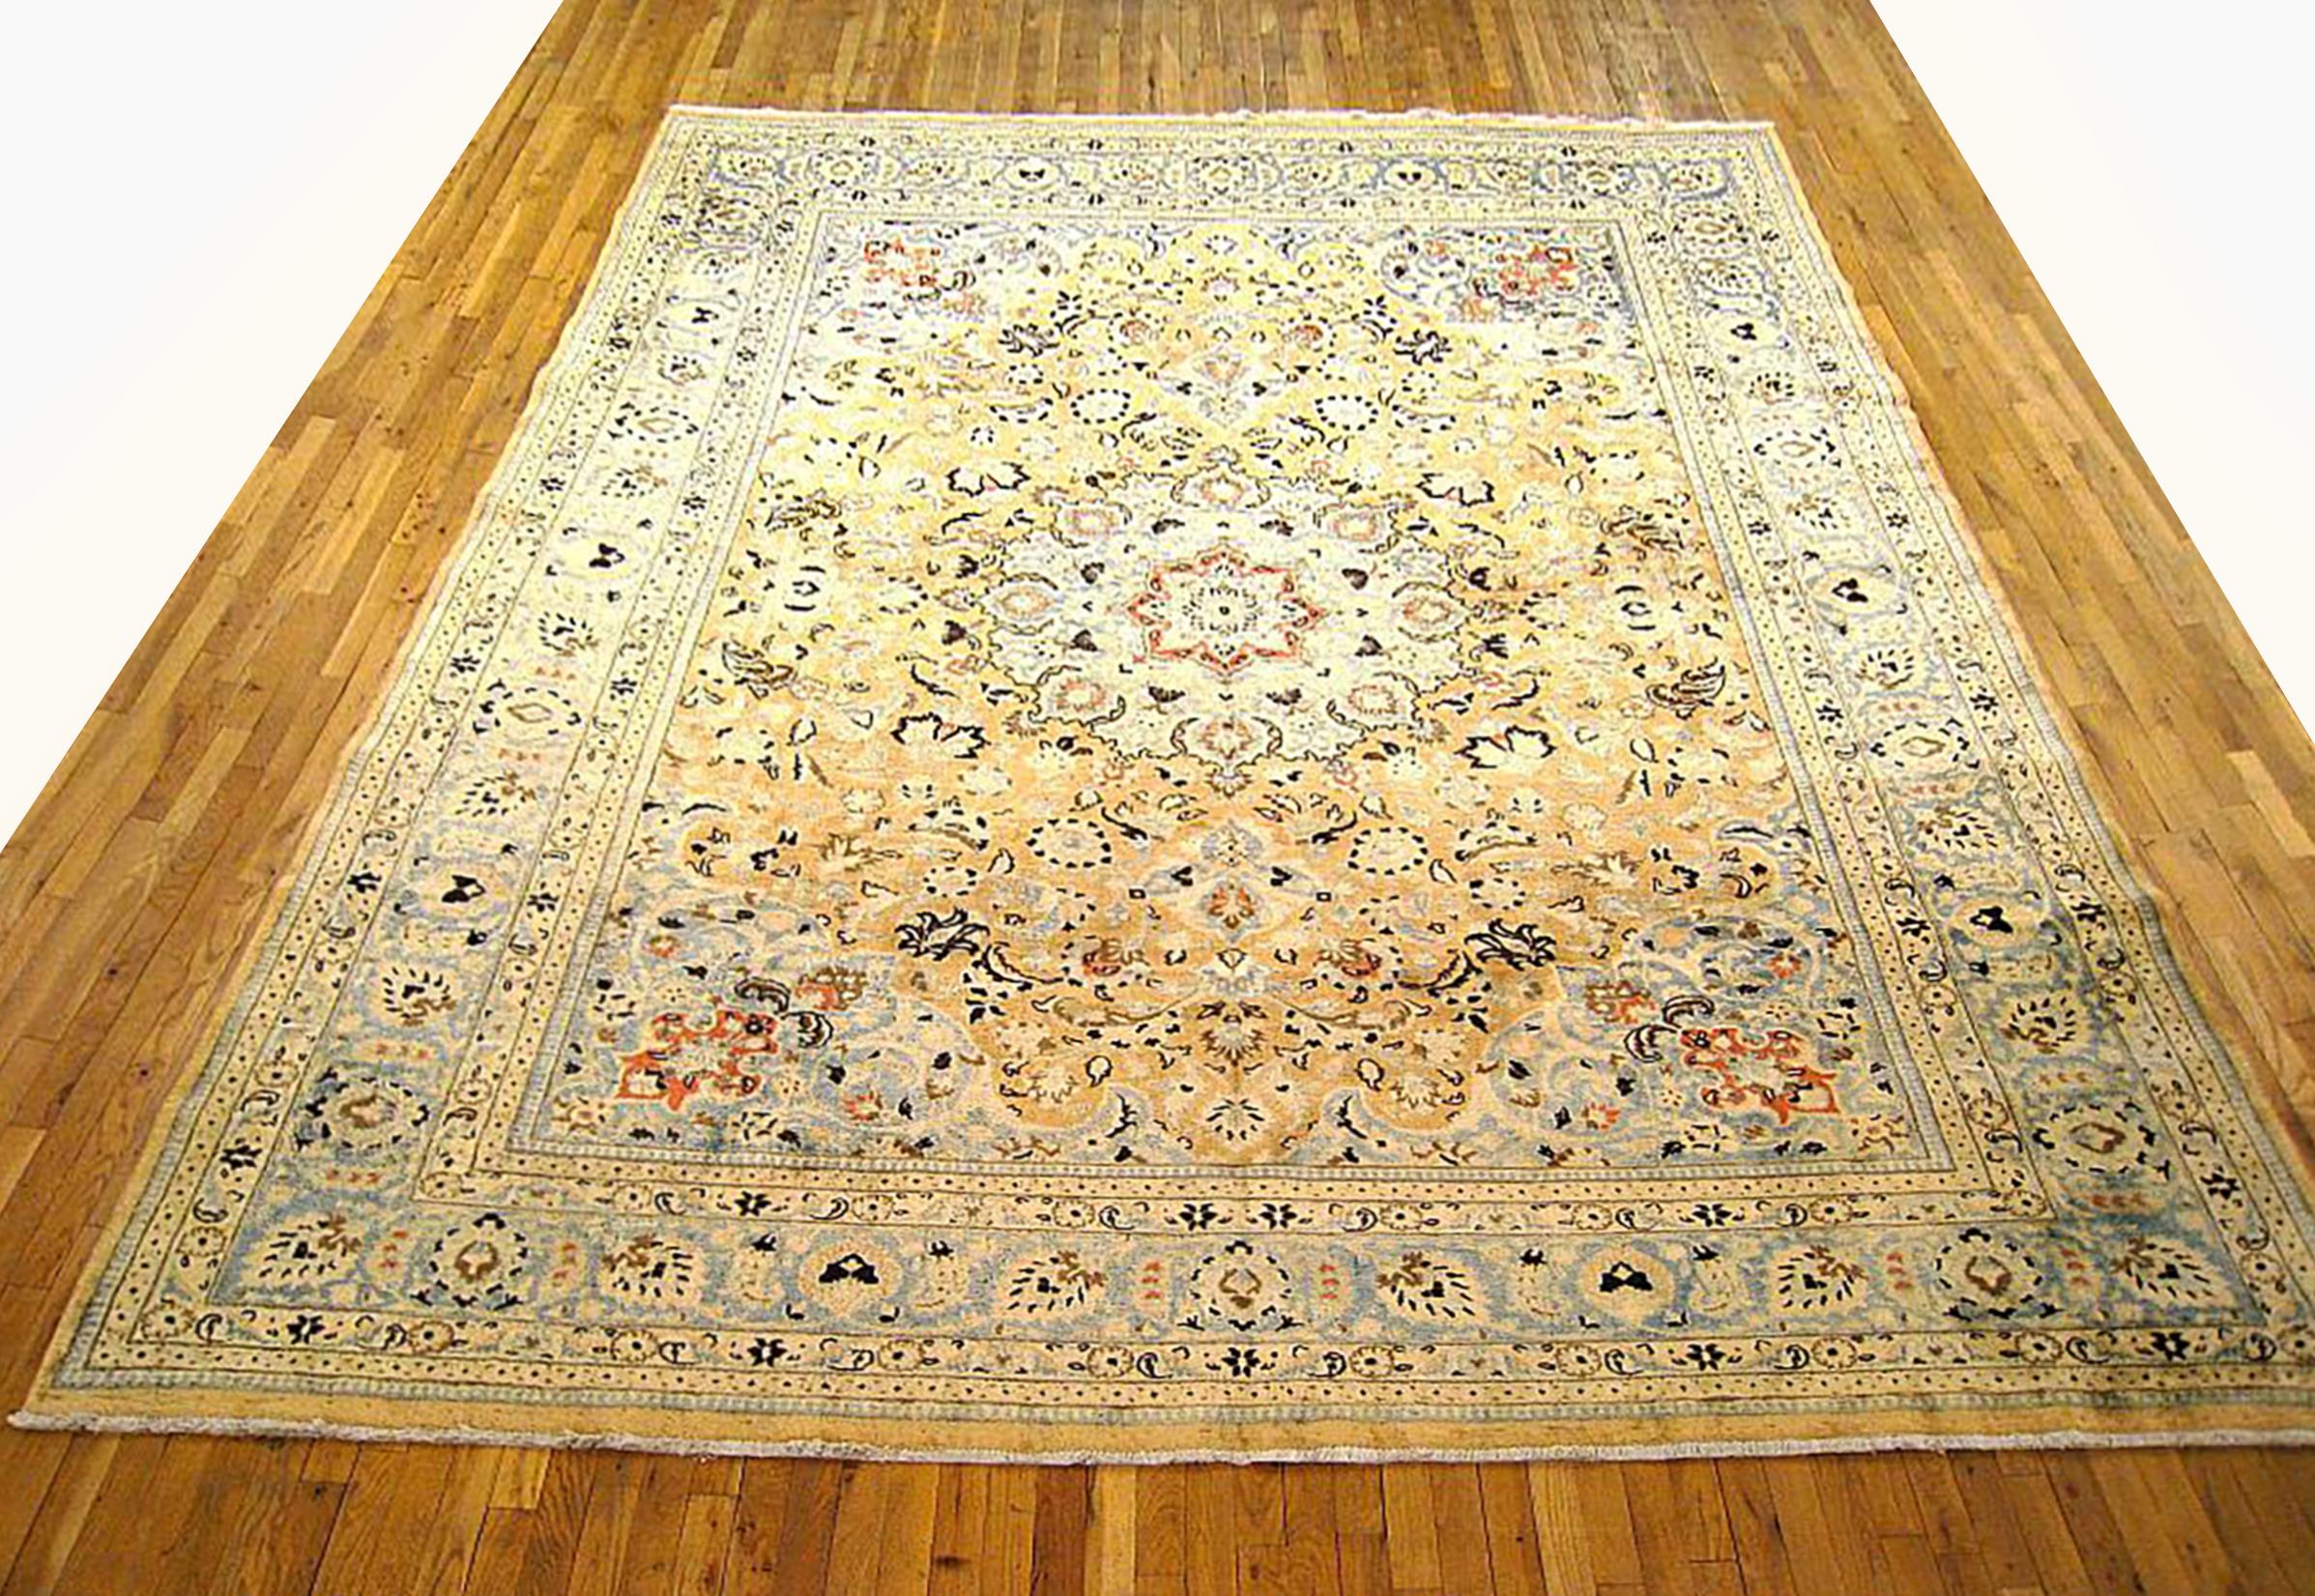 Antique Persian Meshed Oriental Rug, Room size

An antique Persian Meshed oriental rug, size 12'8 x 10'2, circa 1920.  This handsome hand-woven geometric rug features floral elements allover the ivory field.  The central field is enclosed within an